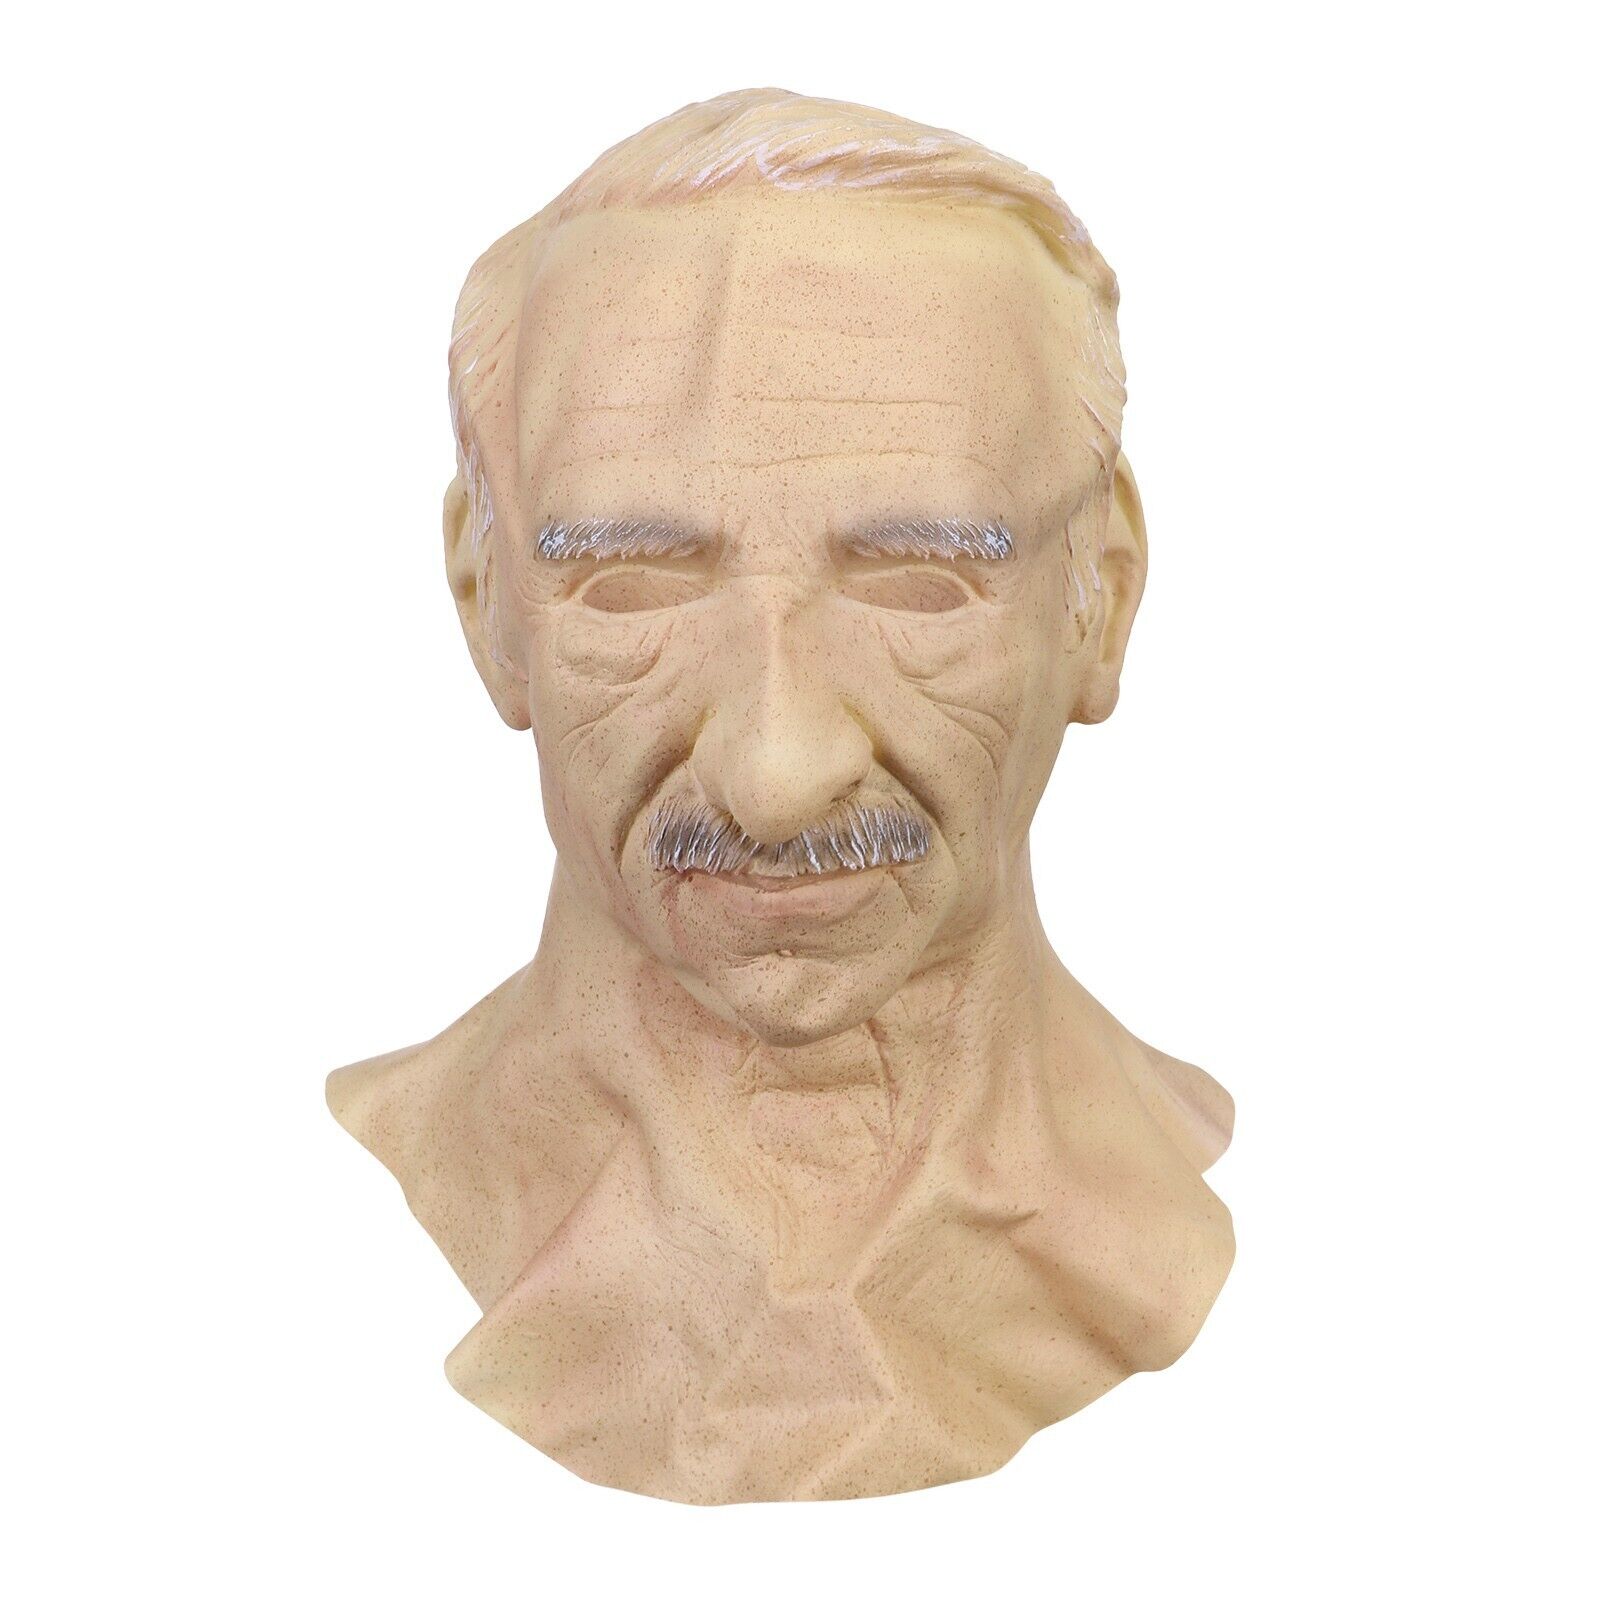 Realistic Latex Face Mask Halloween Cosplay Old Man Mask Costume Disguise US